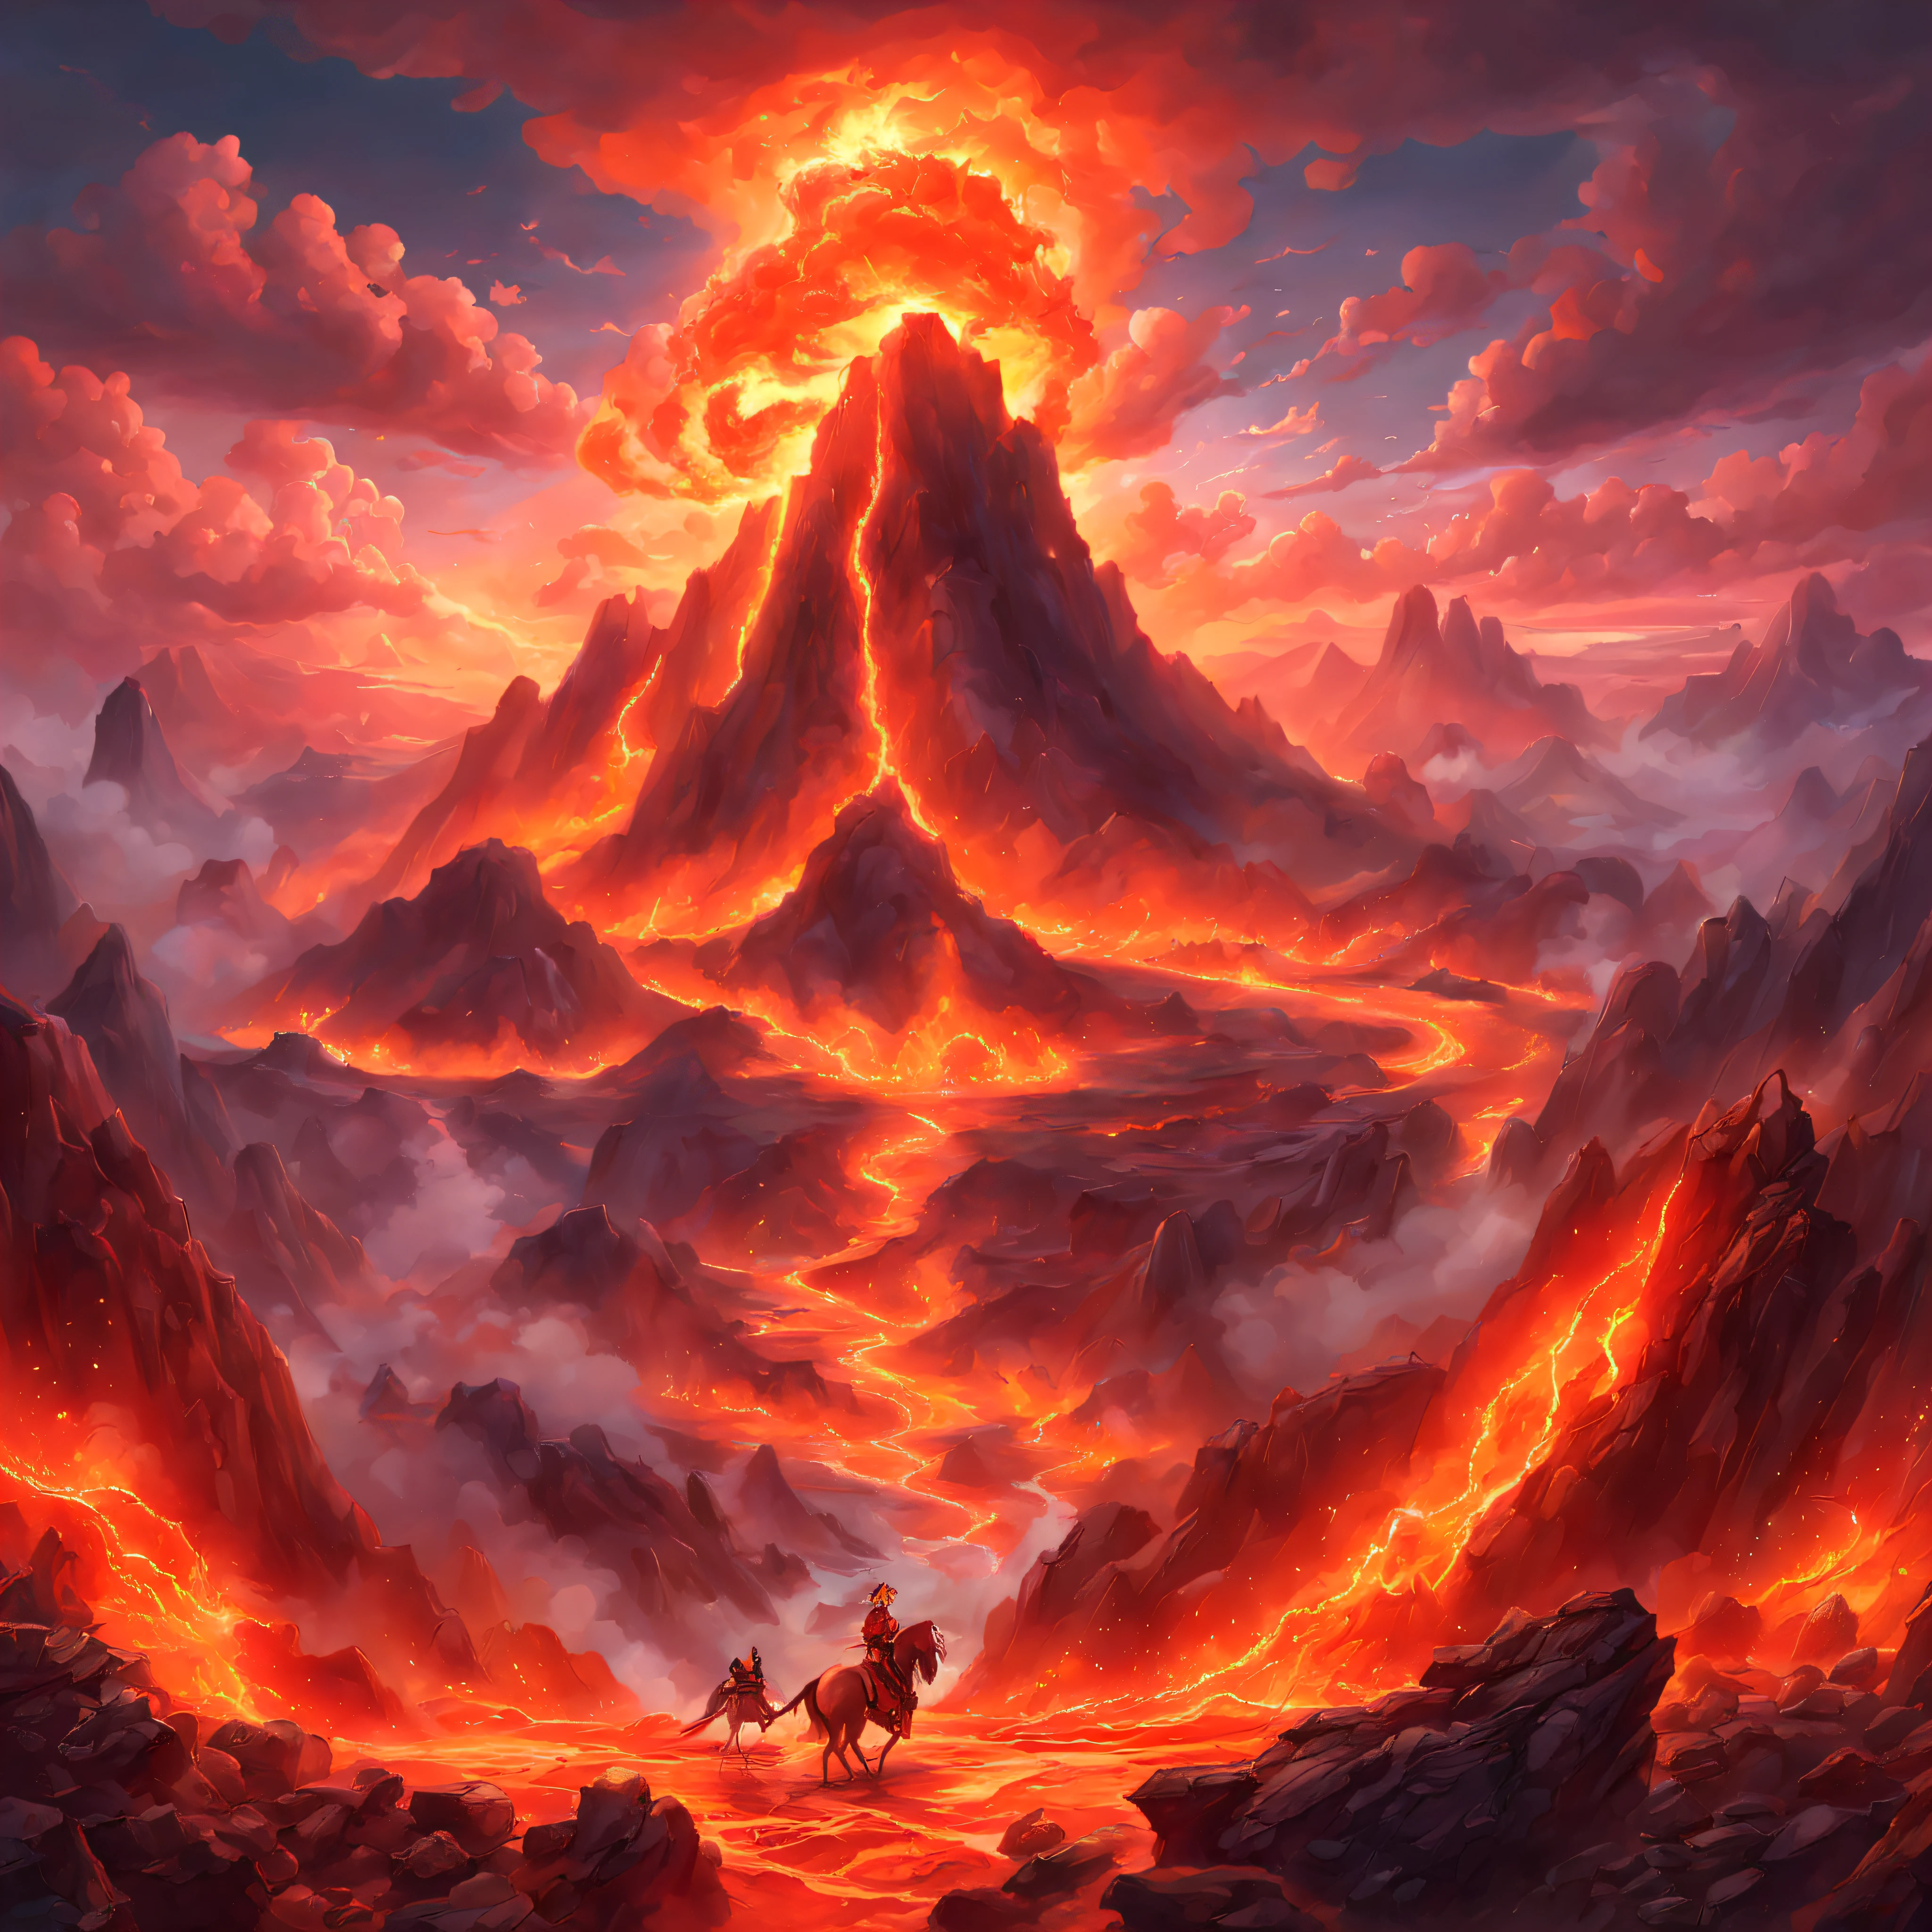 (stickers)，(sticker)，(best qualityer,work of art, Intricate,Hyper-detail,8k Ultra HD,ultra-high resolution，extremely detailed CG unity wallpaper) ,East Meridian of the Great Wilderness，fire unicorn，fire unicorn in volcanic lava，surrounded by lightning，Stand in volcanic lava，The peaks are steep，strange rocks，safe，magma，Dreamland Wonderland、Fantastic，riding，Illustrative Chinese traditional elements，Hotel in Fuyao，dappled light，mist hazy，Mystical Aura，Masterpiece artwork，k hd，Rich in Color，Detailed back details，seven colors